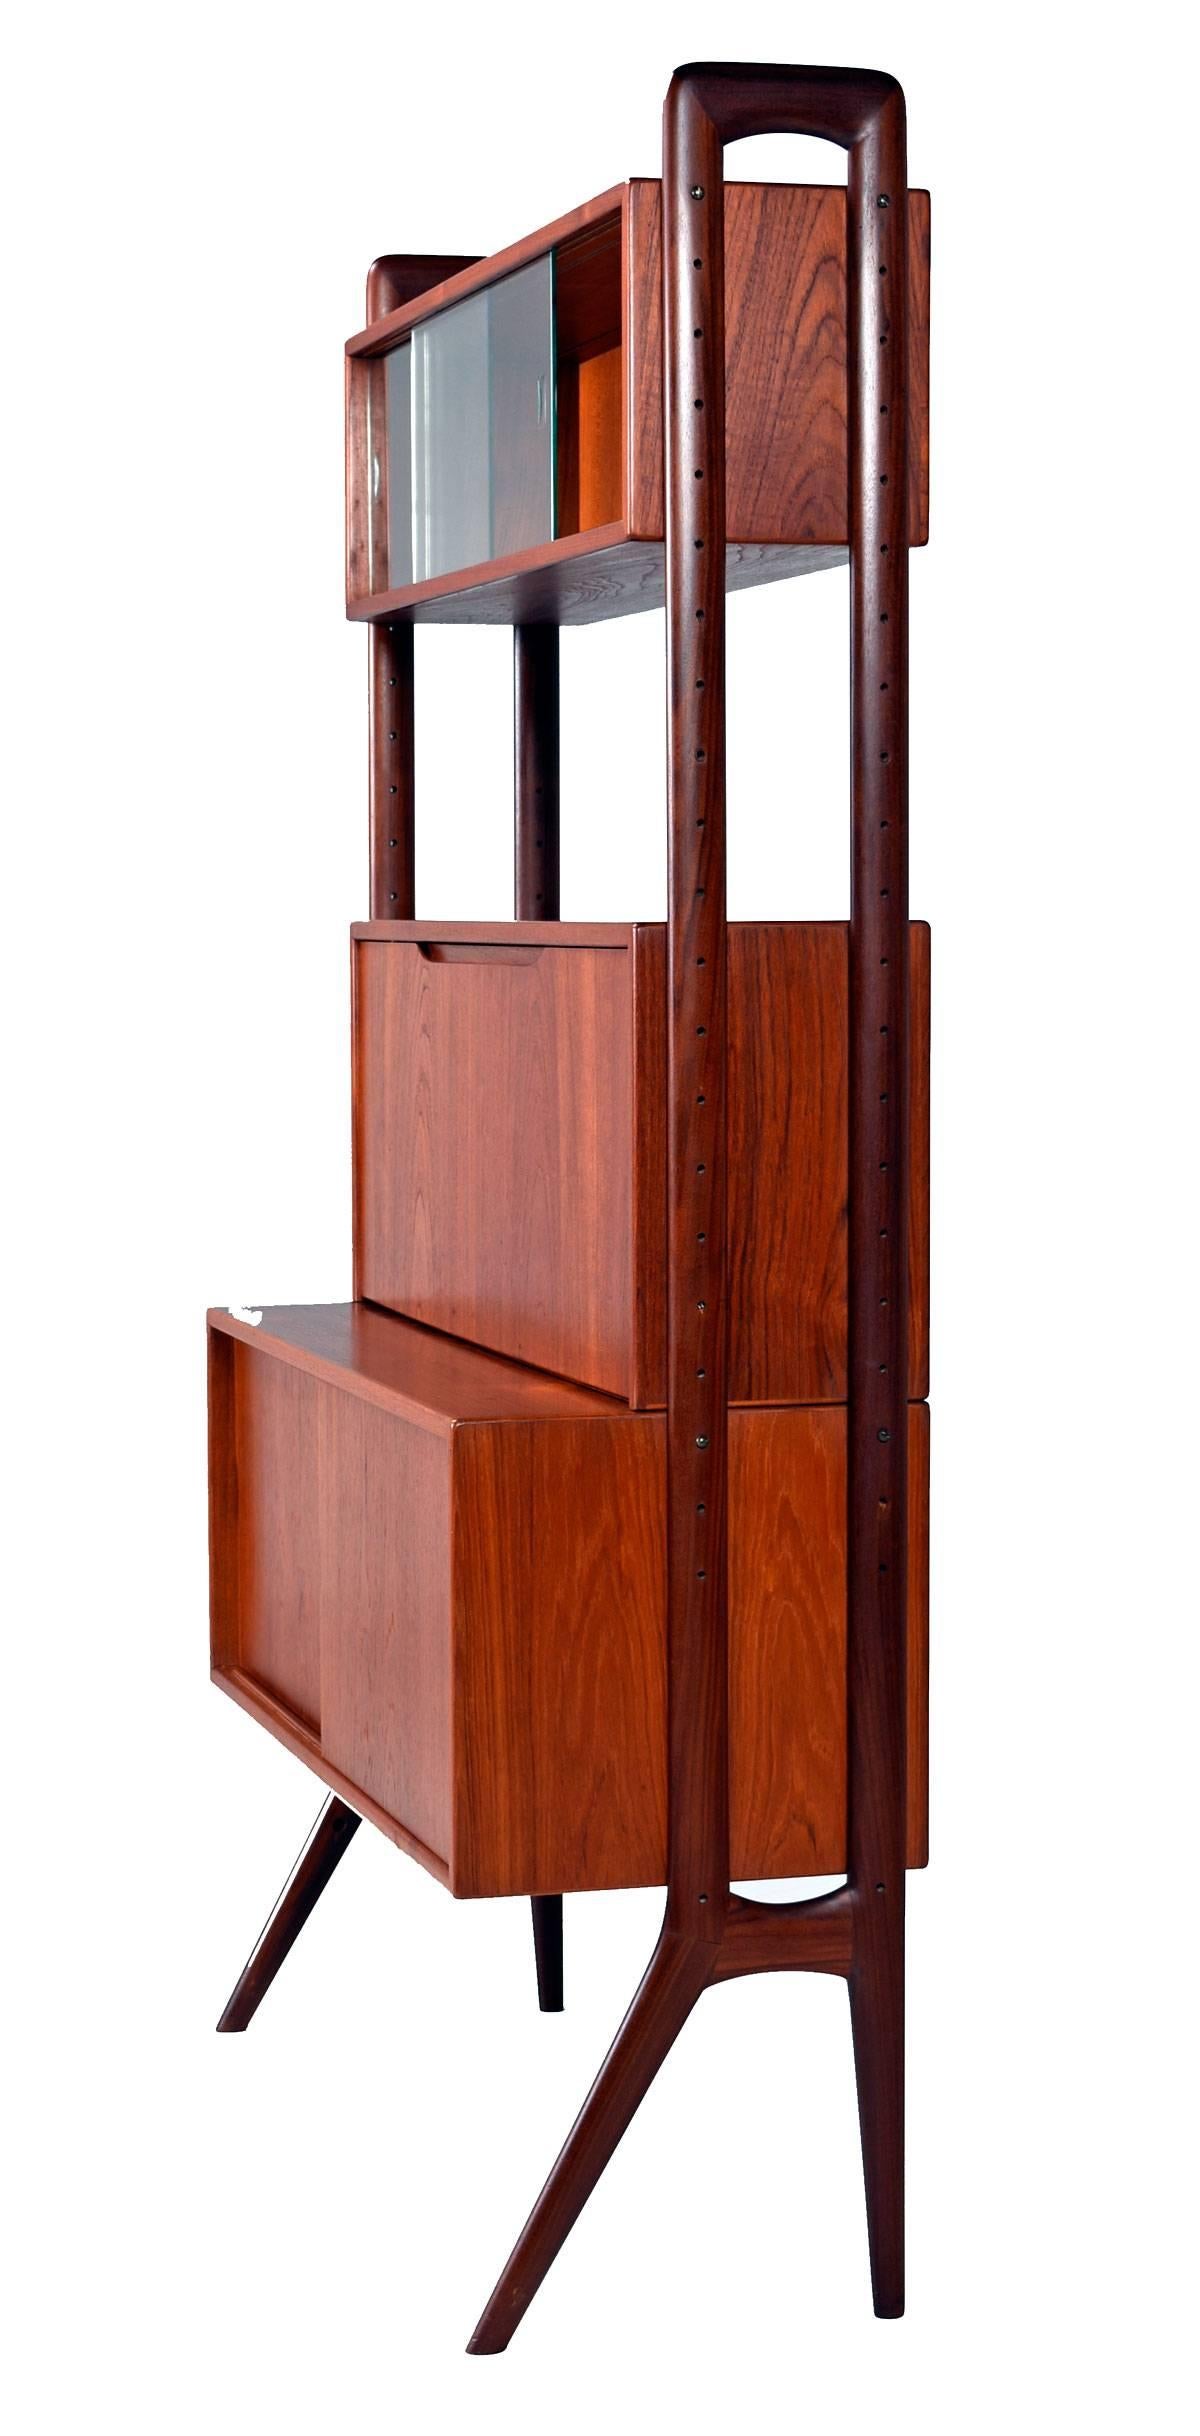 Gorgeous Scandinavian Modern open modular teak wall unit room divider by Kurt Ostervig. Features three adjustable cabinets, one sliding double door large cabinet with a movable shelf, a smaller glass front sliding door cabinet and a medium sized